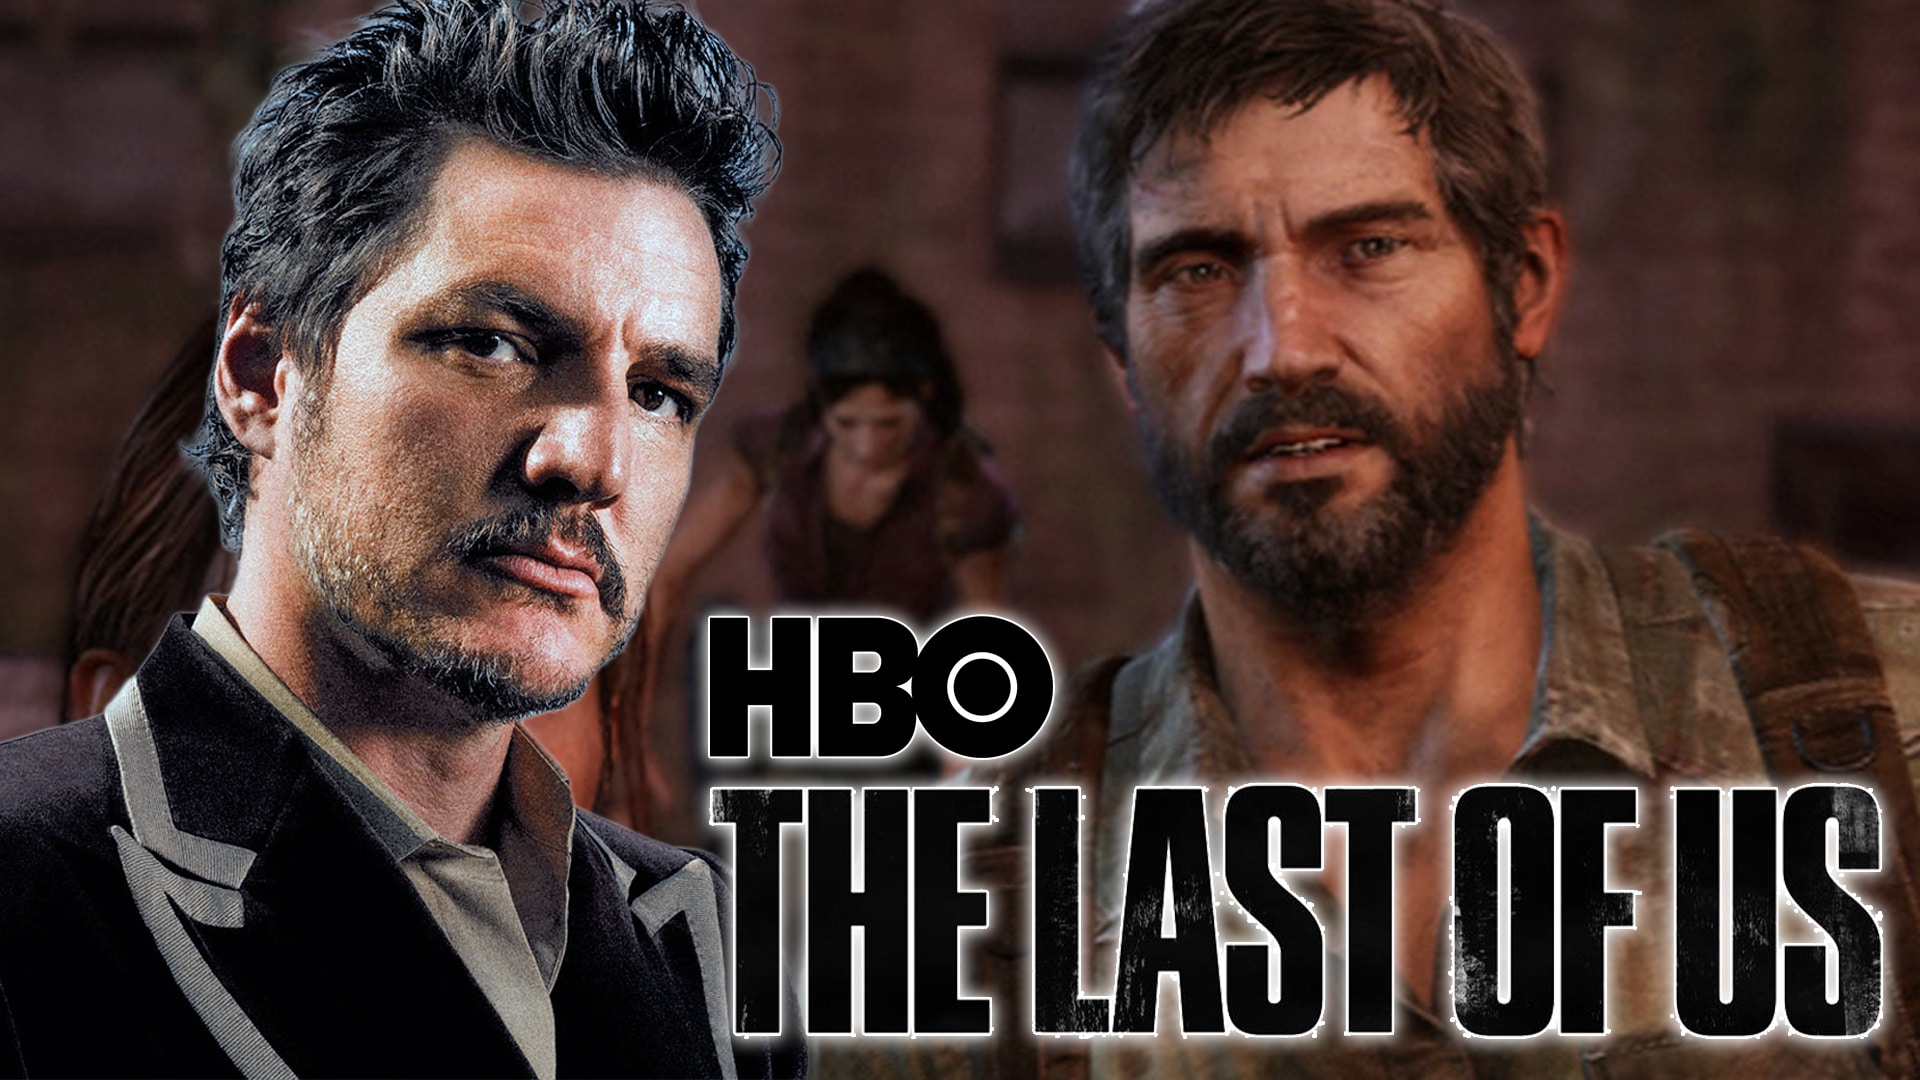 Pedro Pascal Cast as Joel in The Last of Us